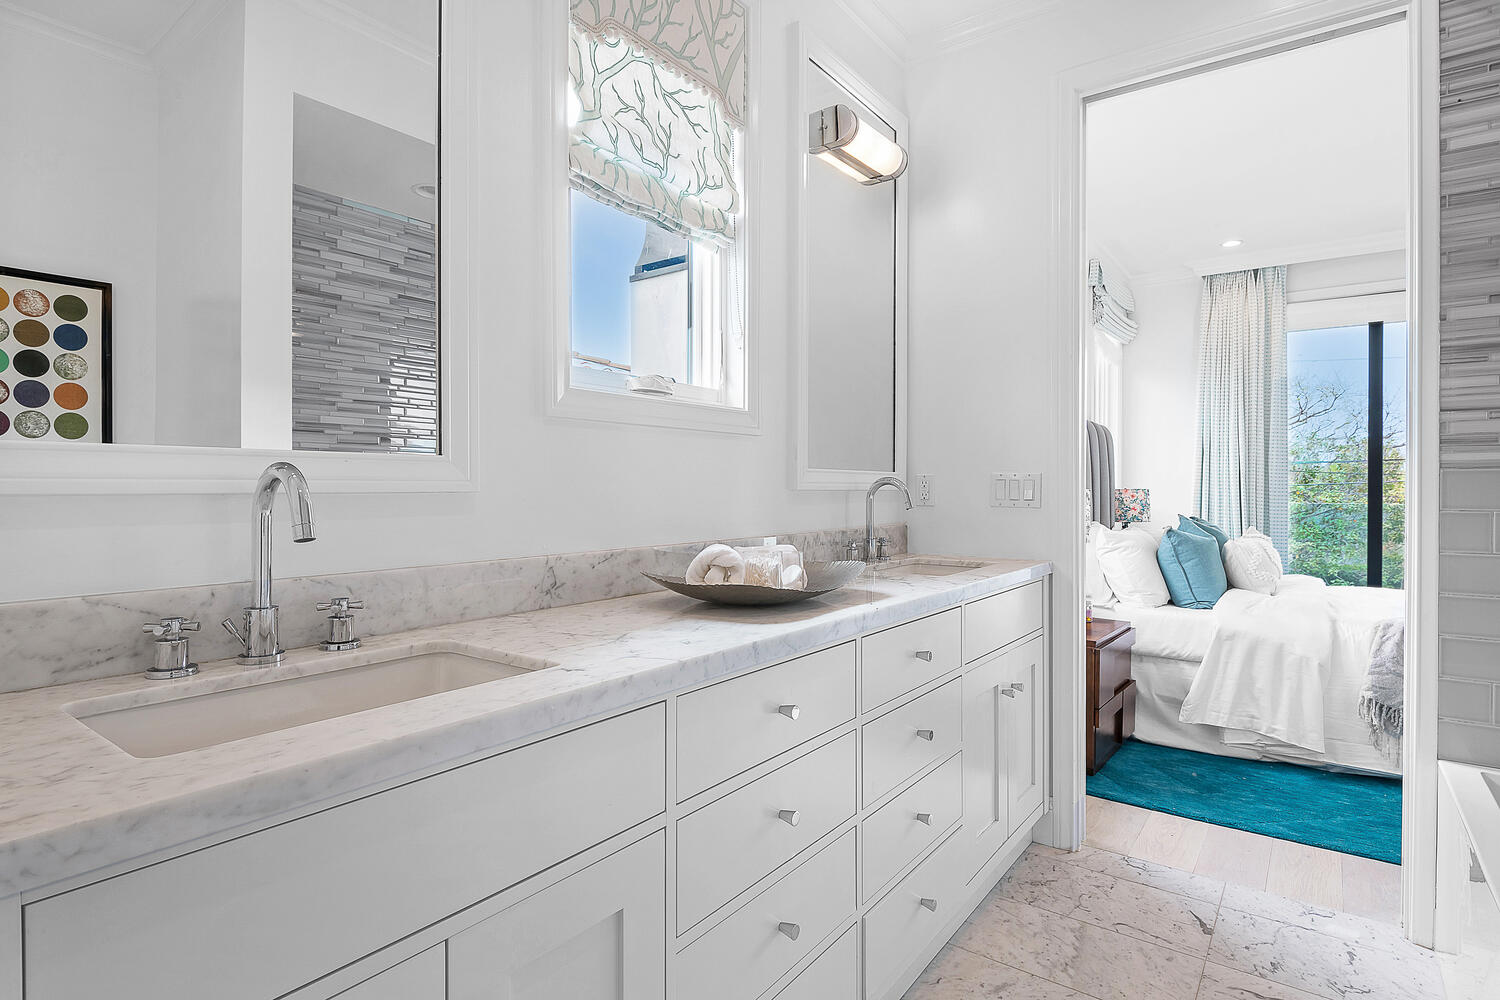 Mostly white bathroom with large two-sink vanity